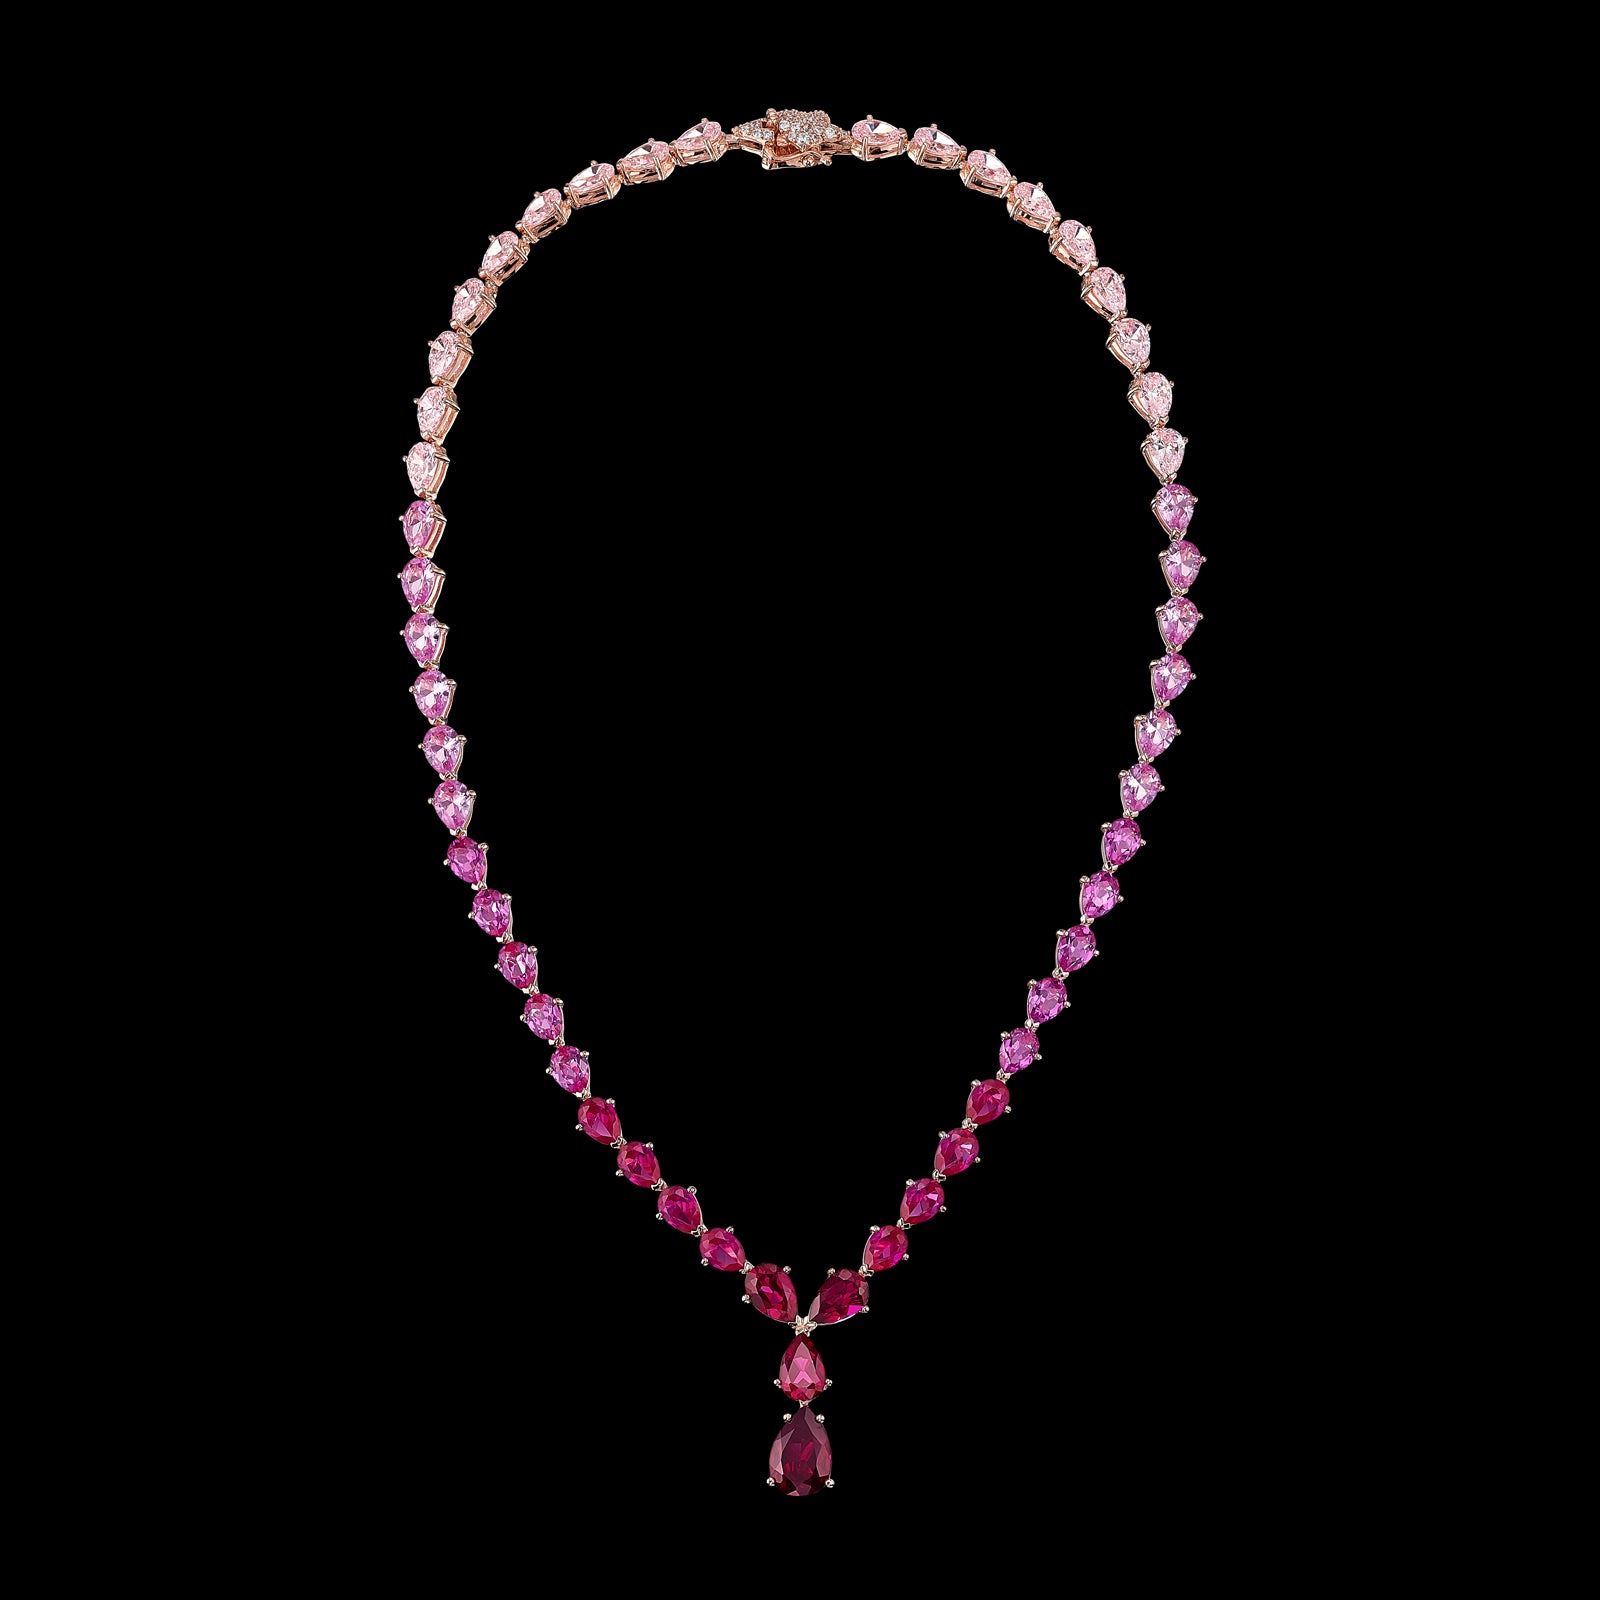 Fuchsia Nova Necklace, Necklace, Anabela Chan Joaillerie - Fine jewelry with laboratory grown and created gemstones hand-crafted in the United Kingdom. Anabela Chan Joaillerie is the first fine jewellery brand in the world to champion laboratory-grown and created gemstones with high jewellery design, artisanal craftsmanship and a focus on ethical and sustainable innovations.